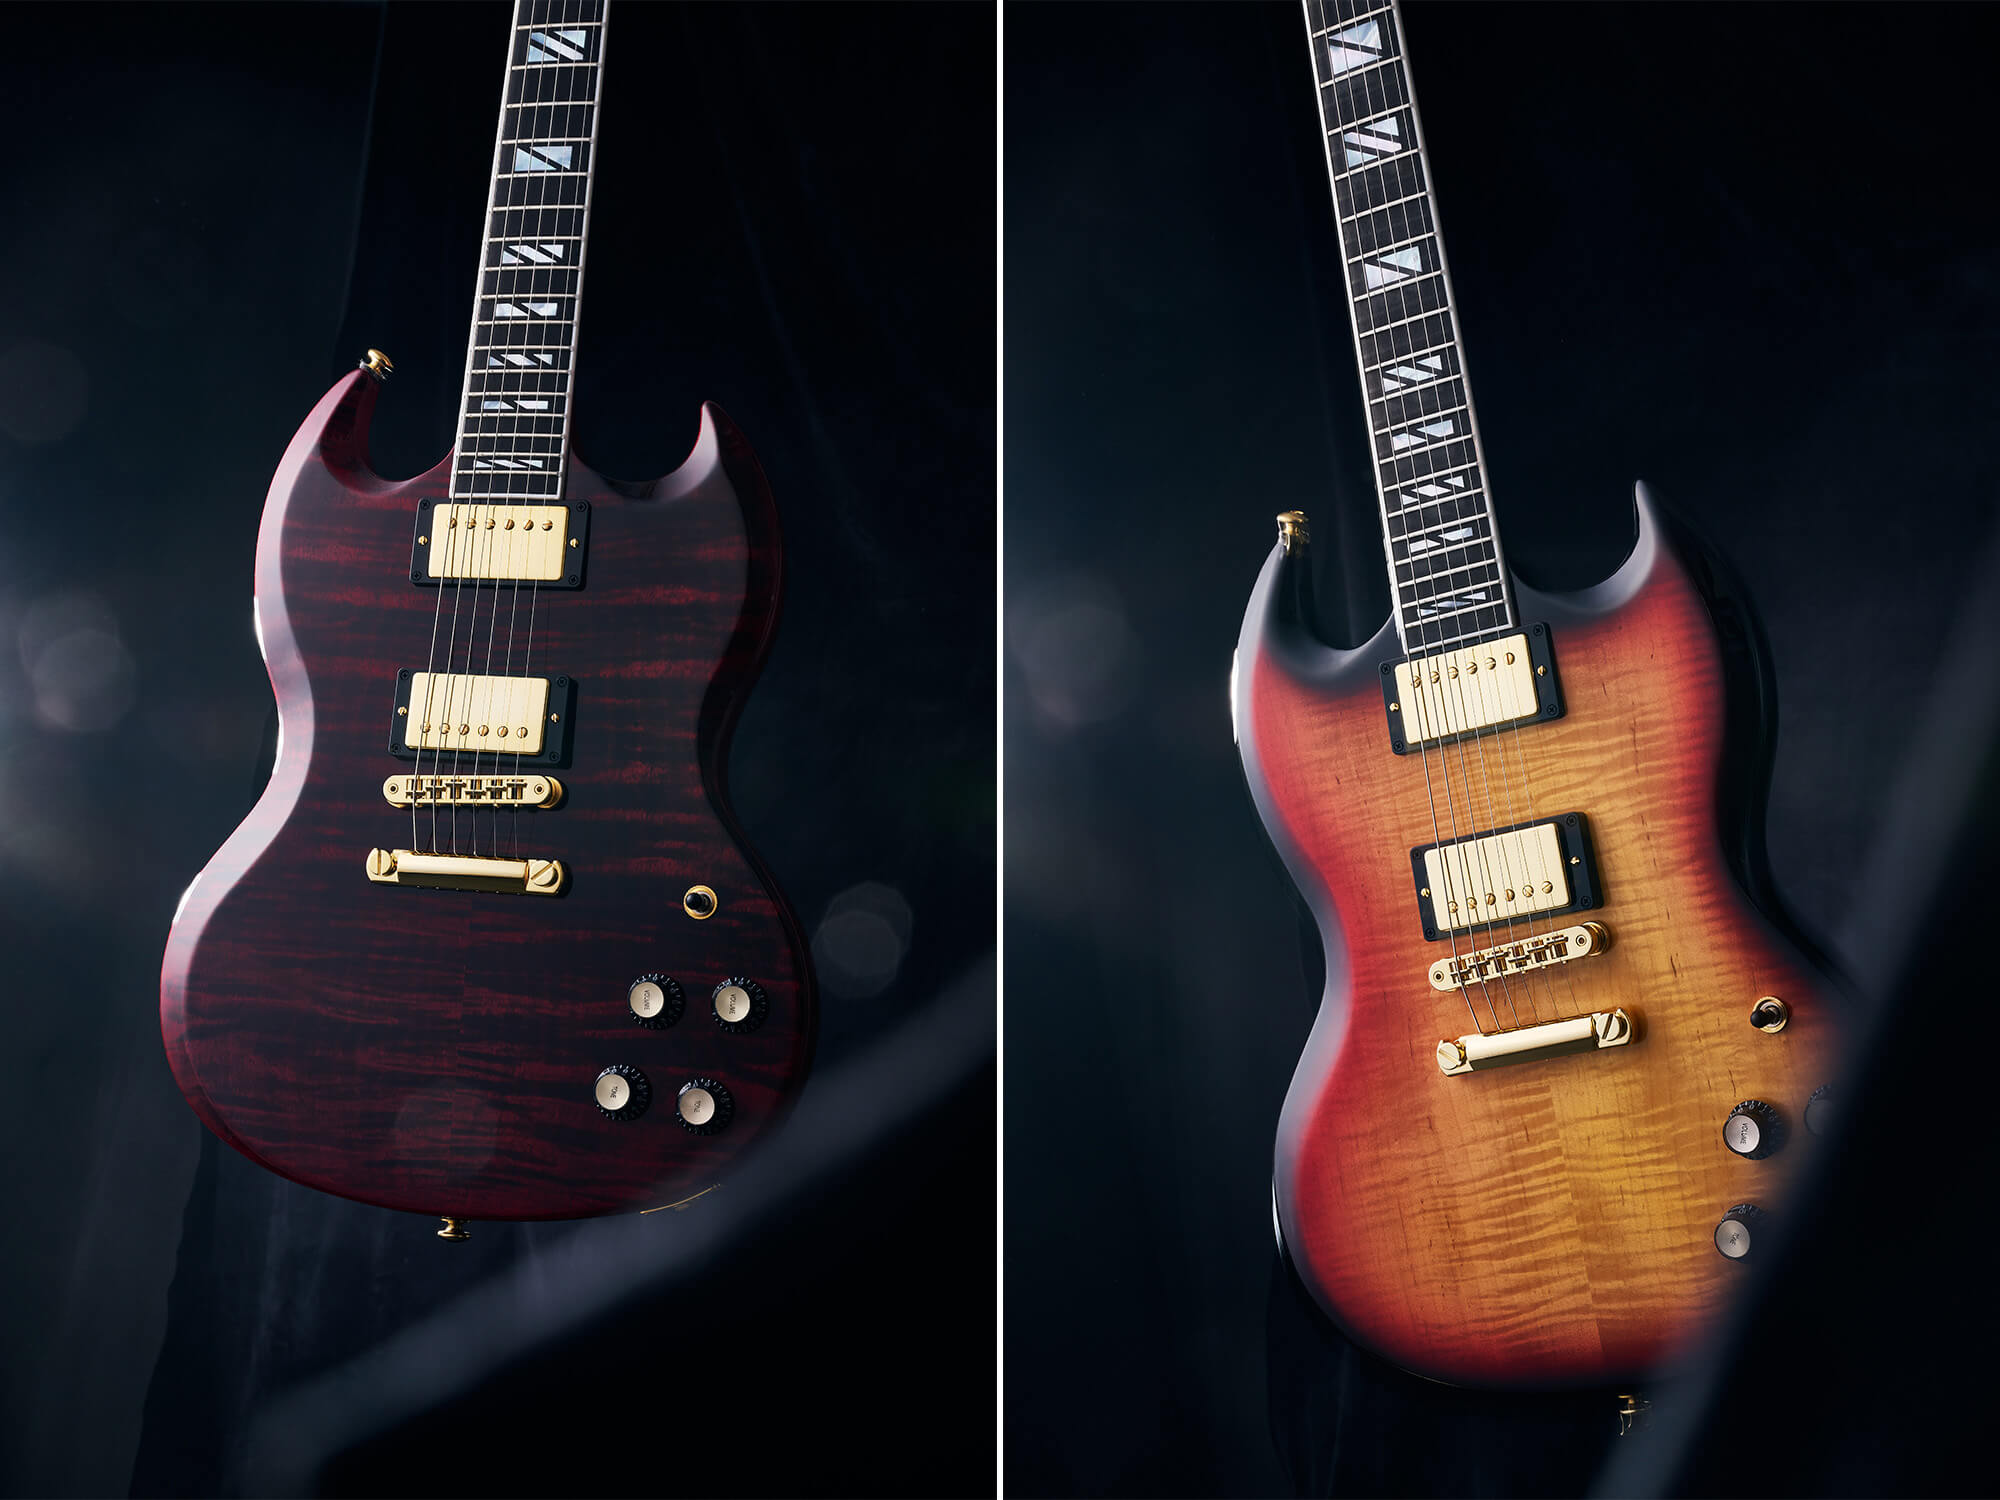 SG Supreme models in Wine Red and Fireburst. They are photographed on a black silk-like background.